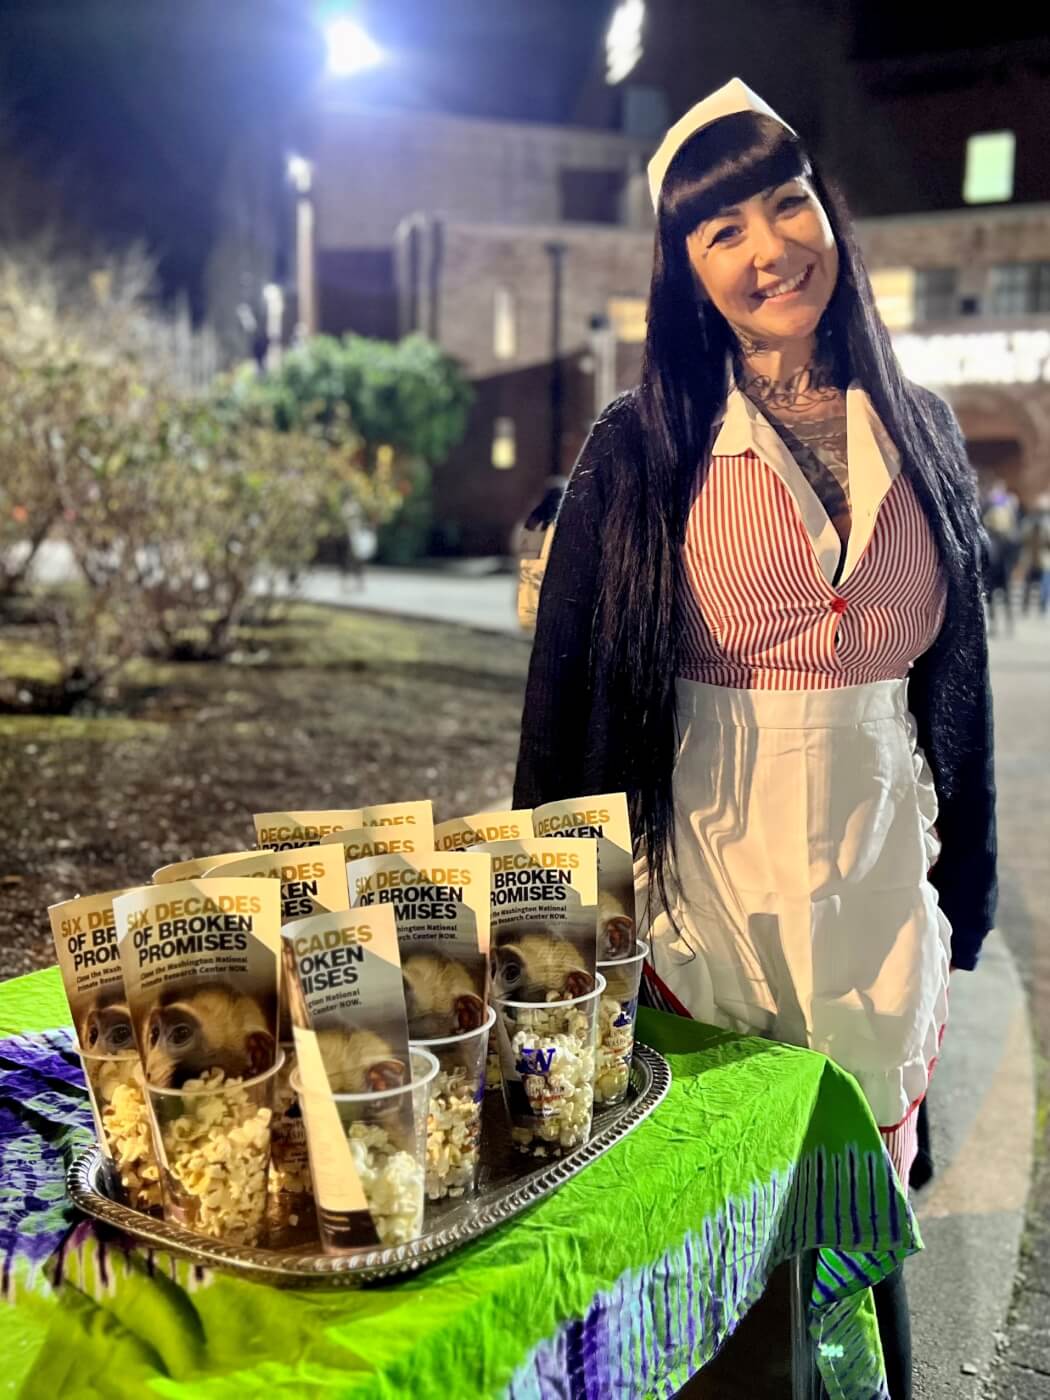 PETA staffer stands next to a table of cups with popcorn and flyers